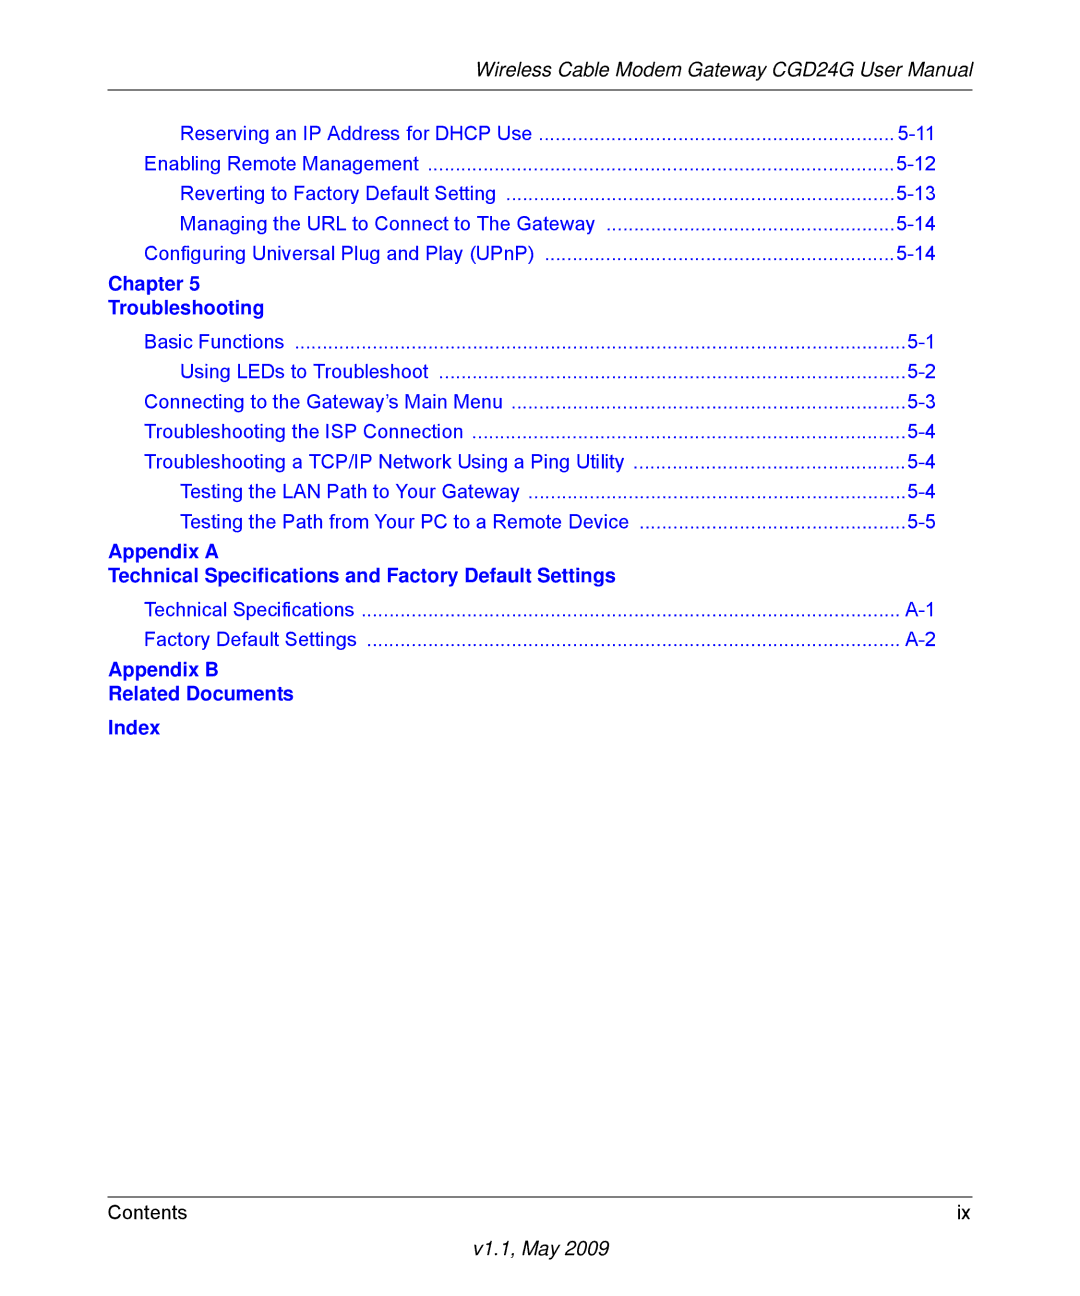 Gateway CGD24G user manual Appendix B Related Documents Index 